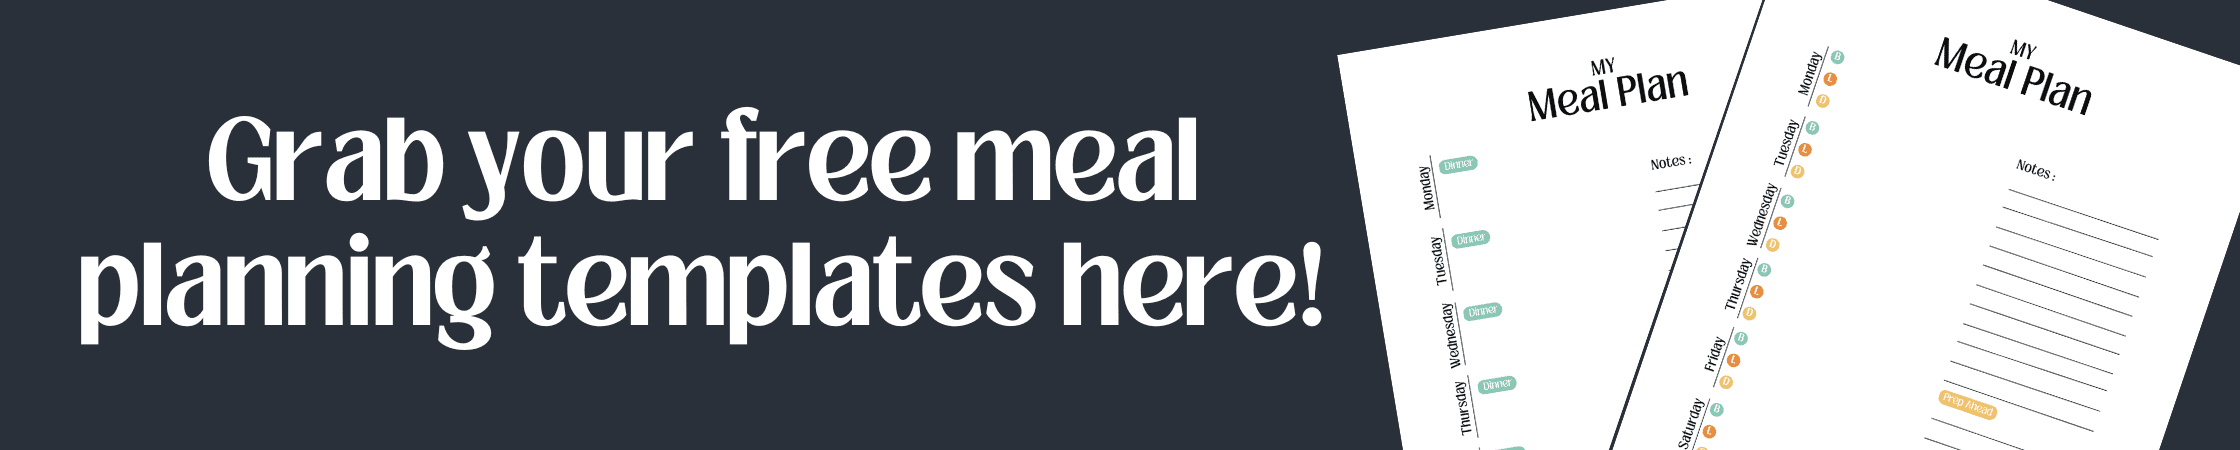 Grab your free meal-planning templates